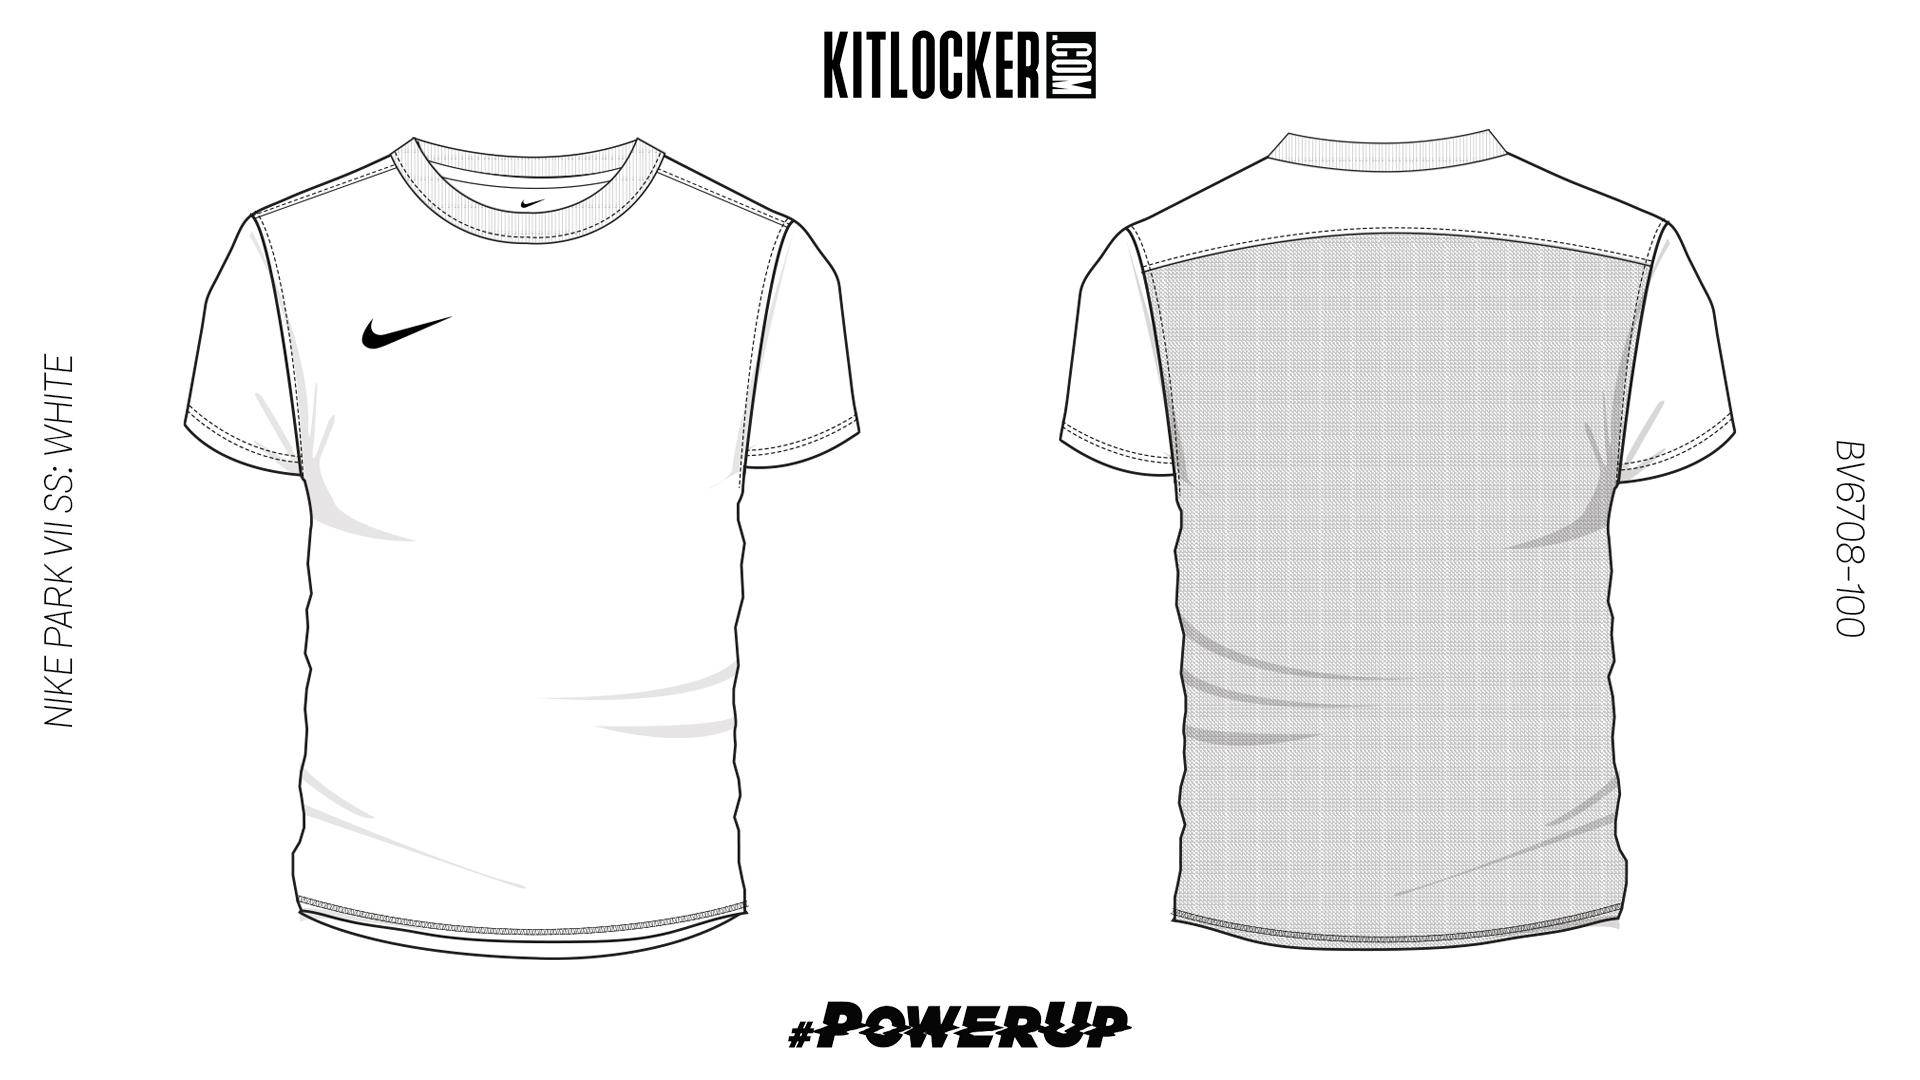 Design Your Own #PowerUp Kit 